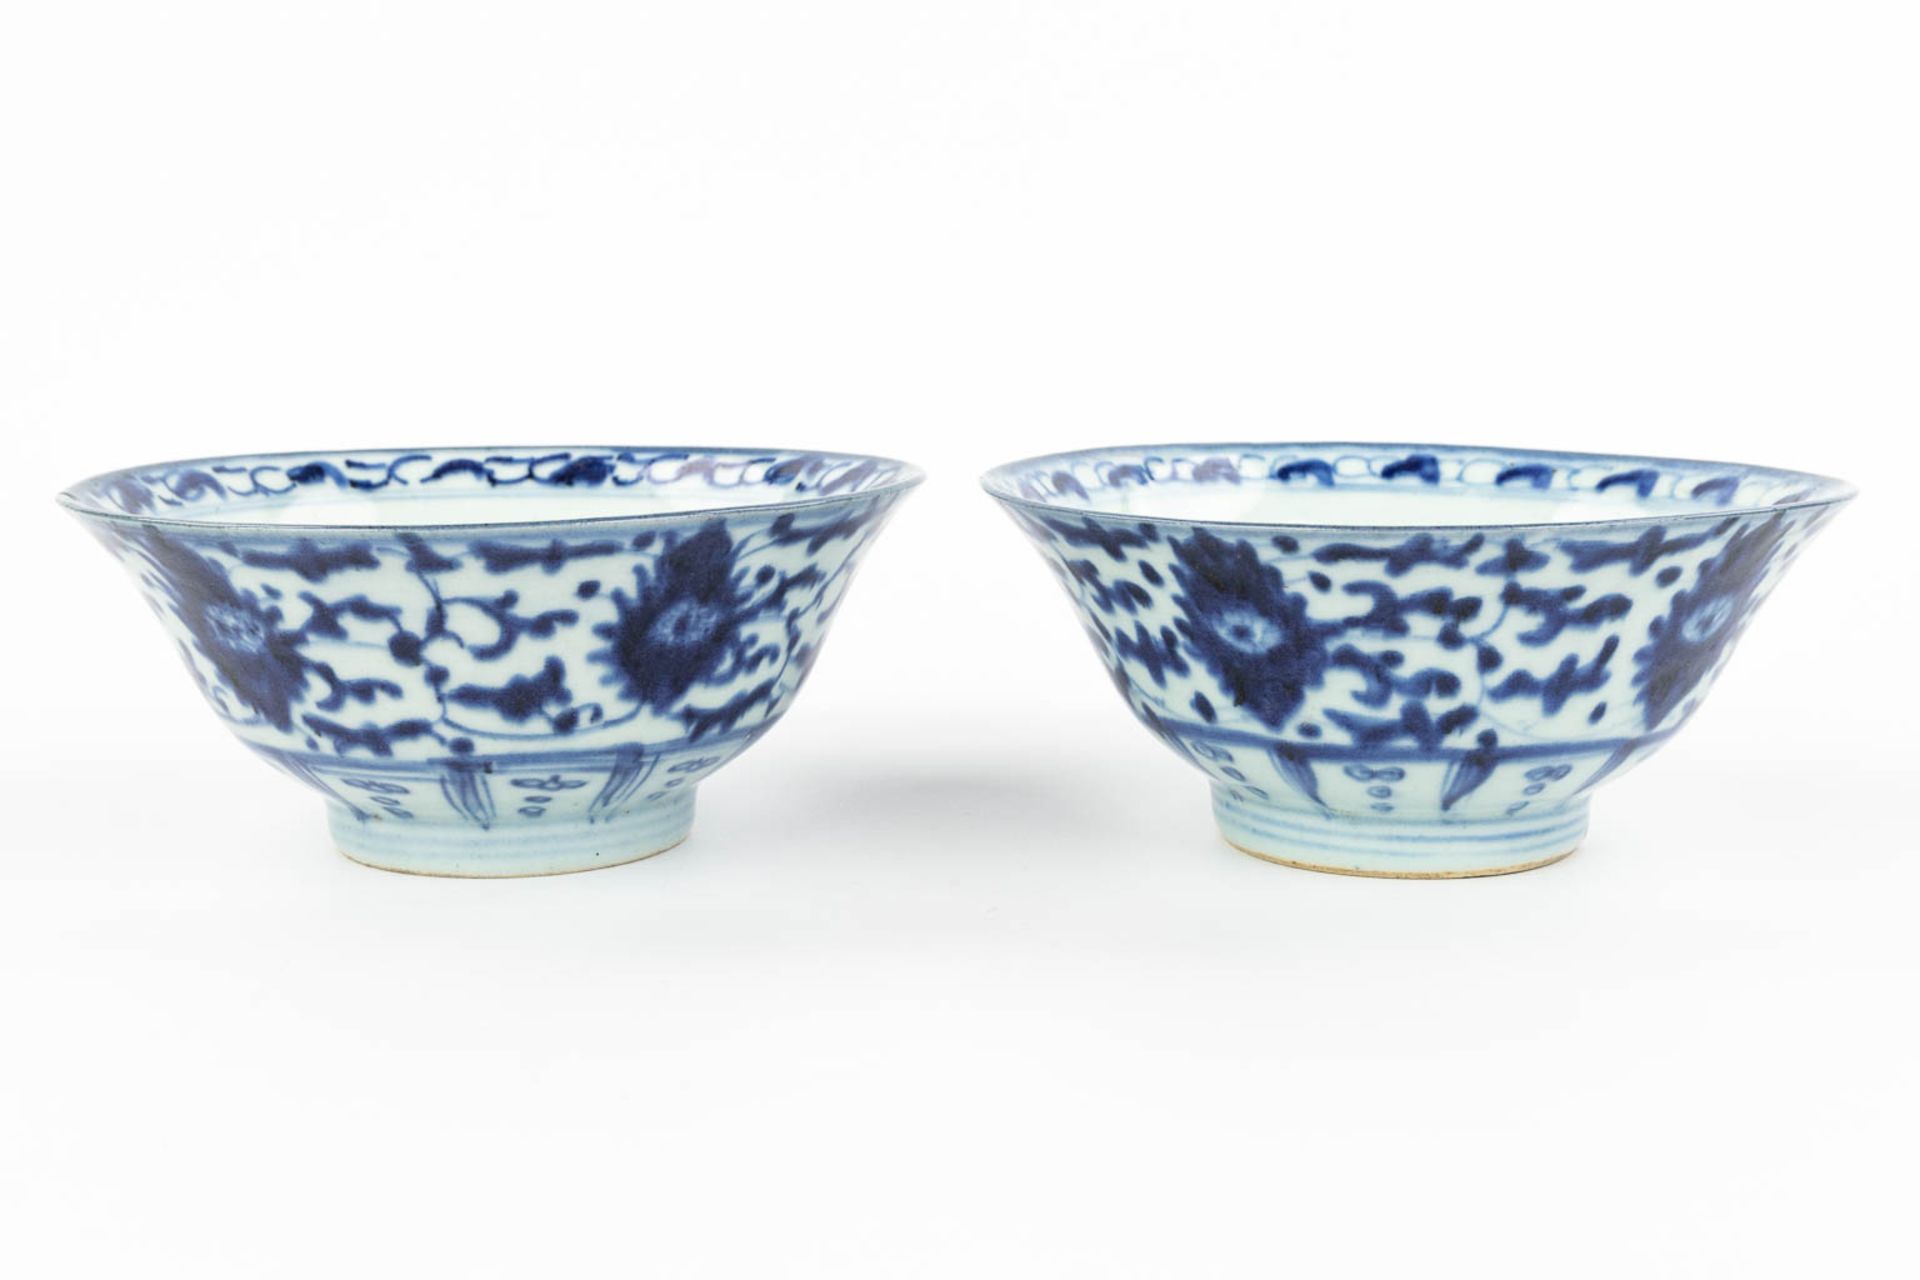 A pair of Chinese bowls made of porcelain with a blue-white decor. (H:7,2cm) - Image 11 of 13